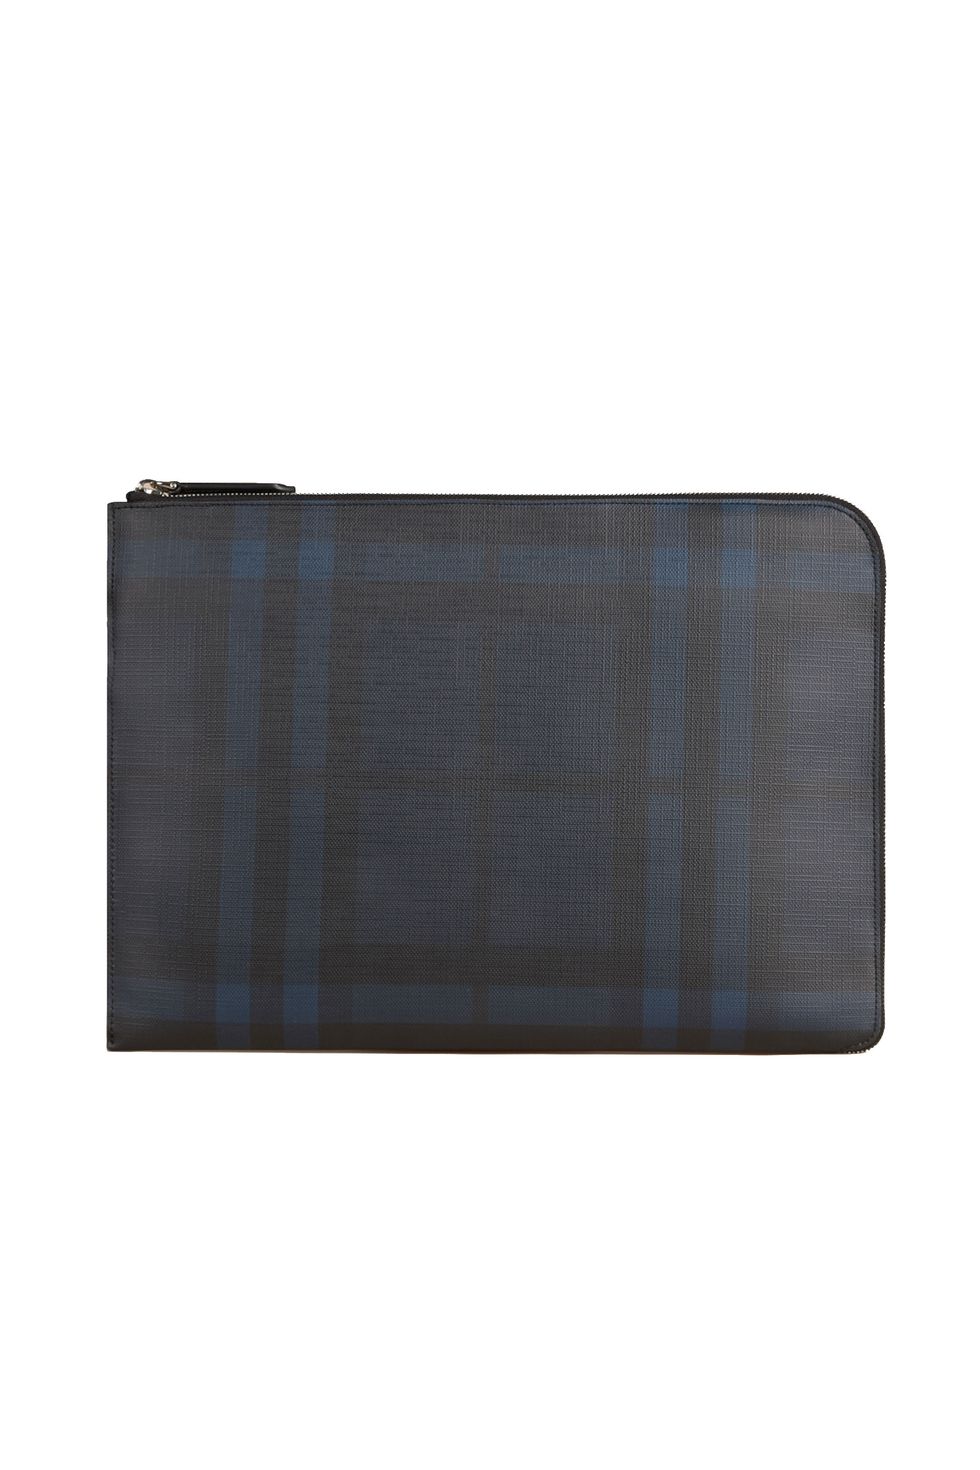 AbChic 10-11 Designer Laptop Sleeve also for 11 Apple MB Air in Black  Pattern